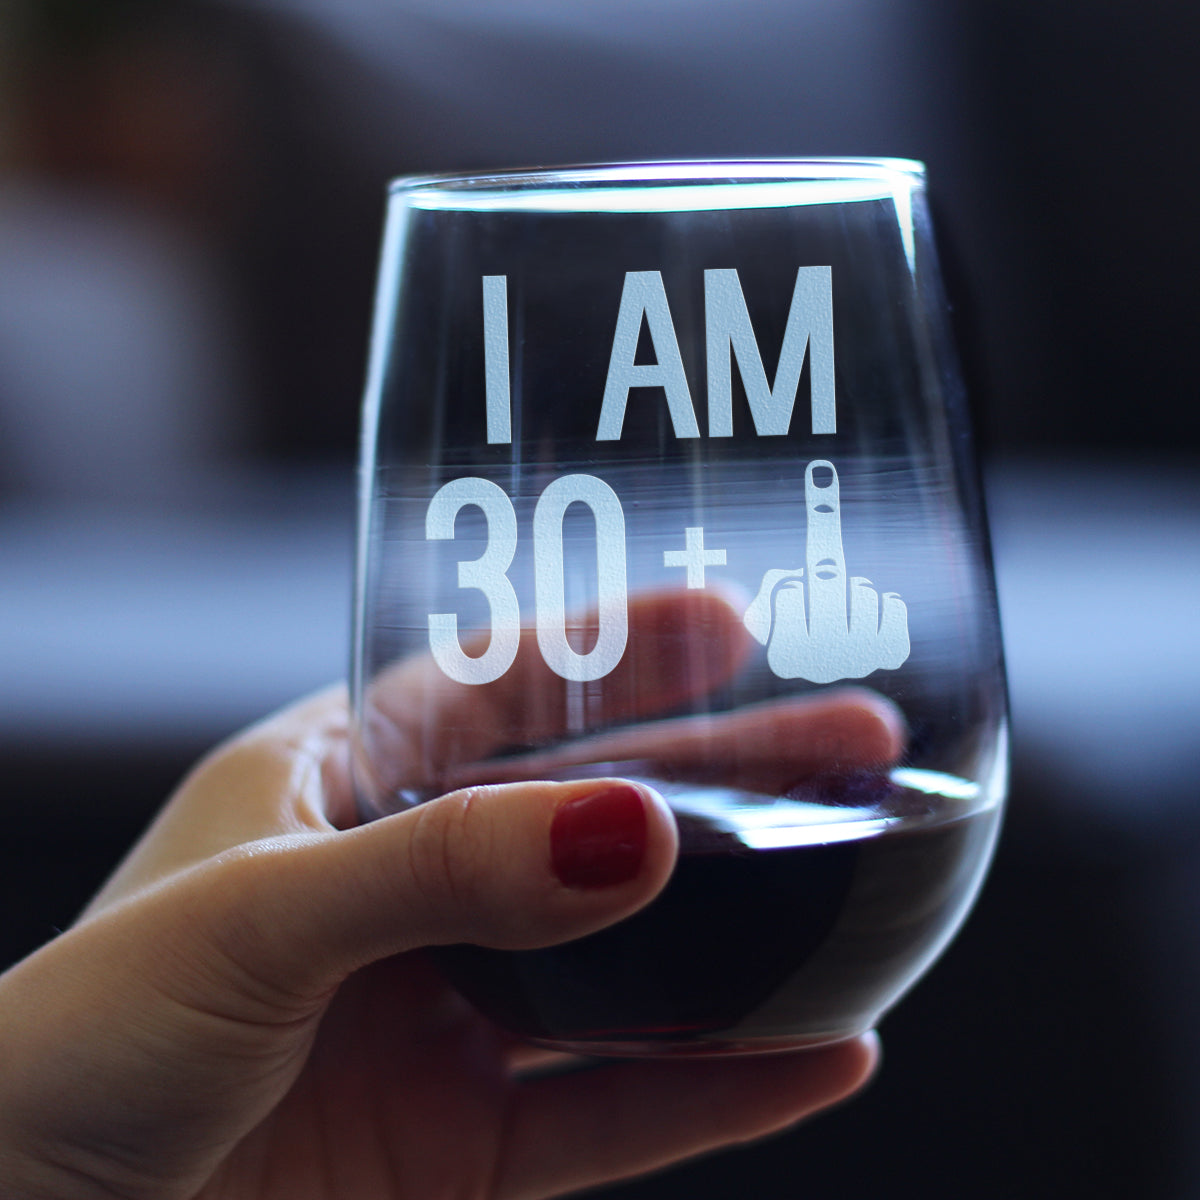 30 + 1 Middle Finger - 31st Birthday Stemless Wine Glass for Women &amp; Men - Cute Funny Wine Gift Idea - Unique Personalized Bday Glasses for Best Friend Turning 31 - Drinking Party Decoration